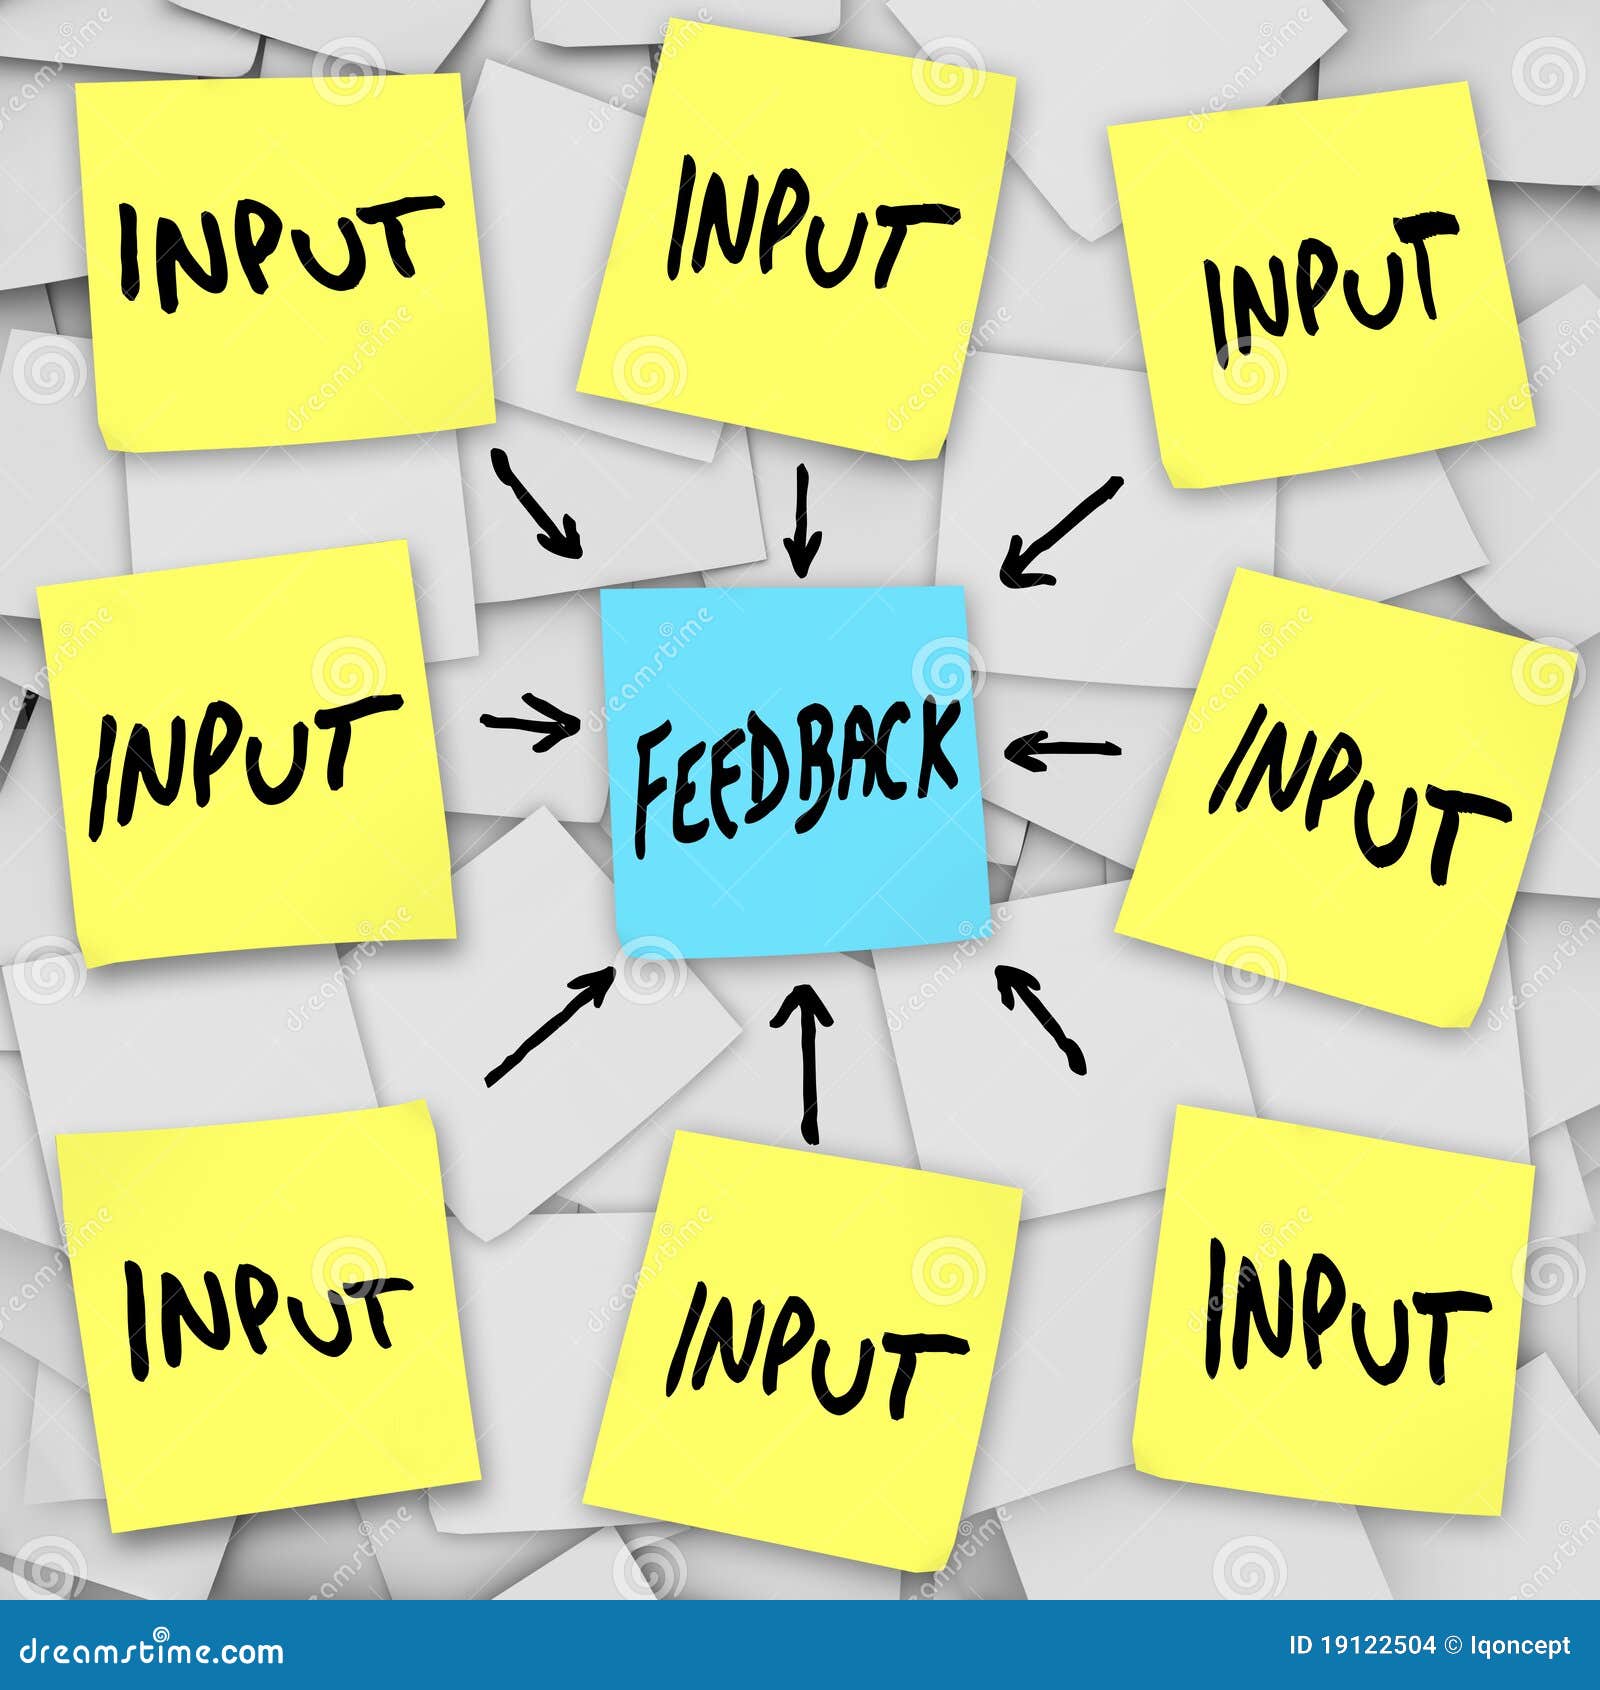 input and feedback - sticky note message board